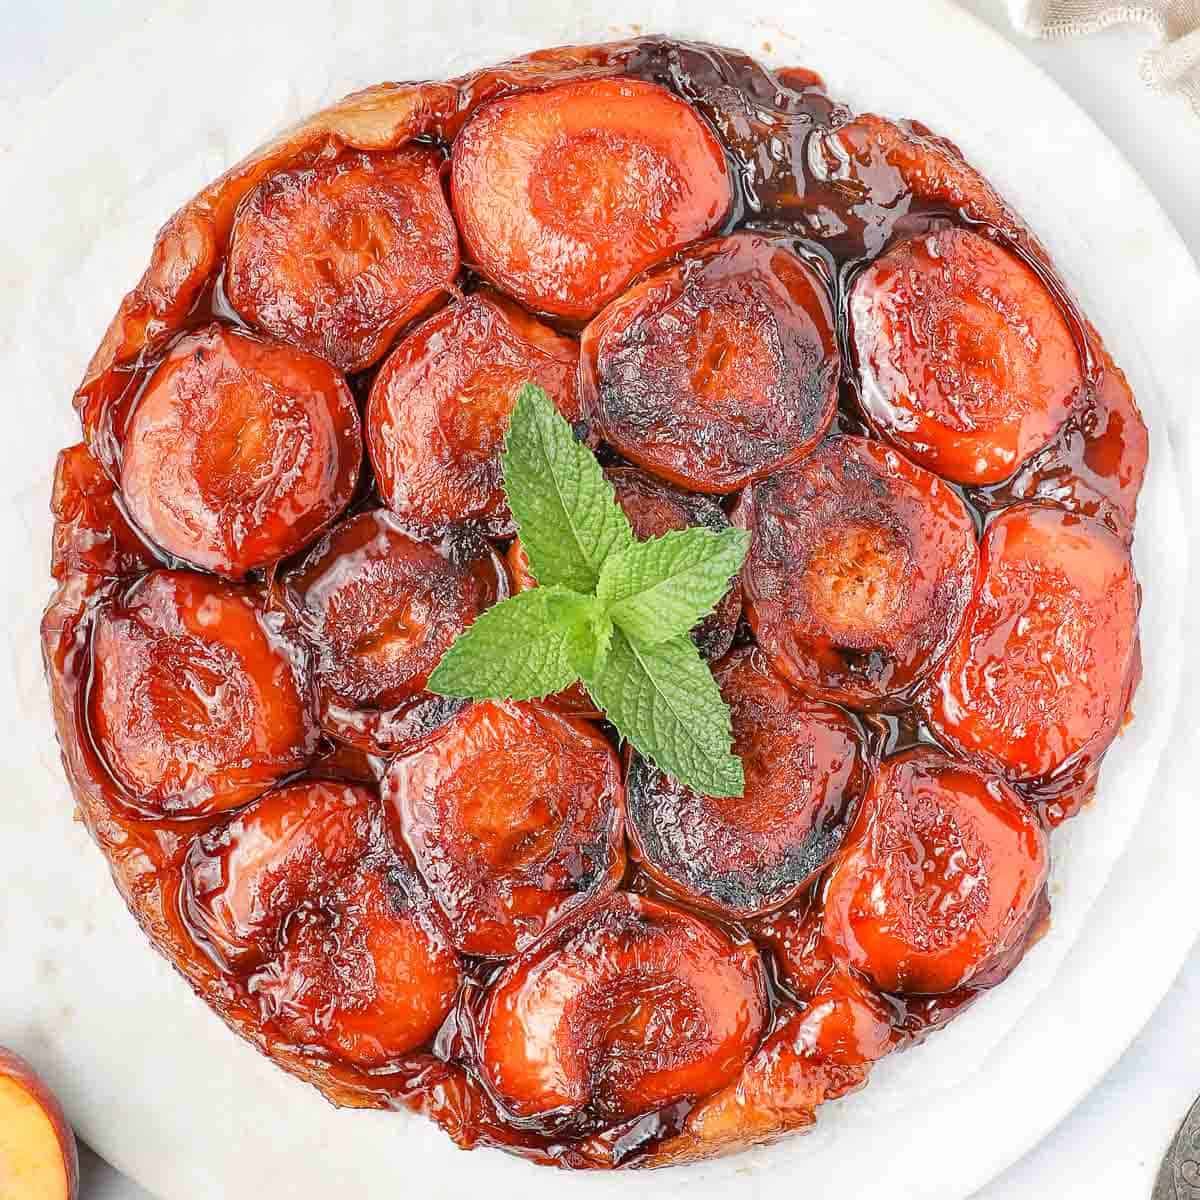 Baked tarte tatin seen from above and topped with mint.